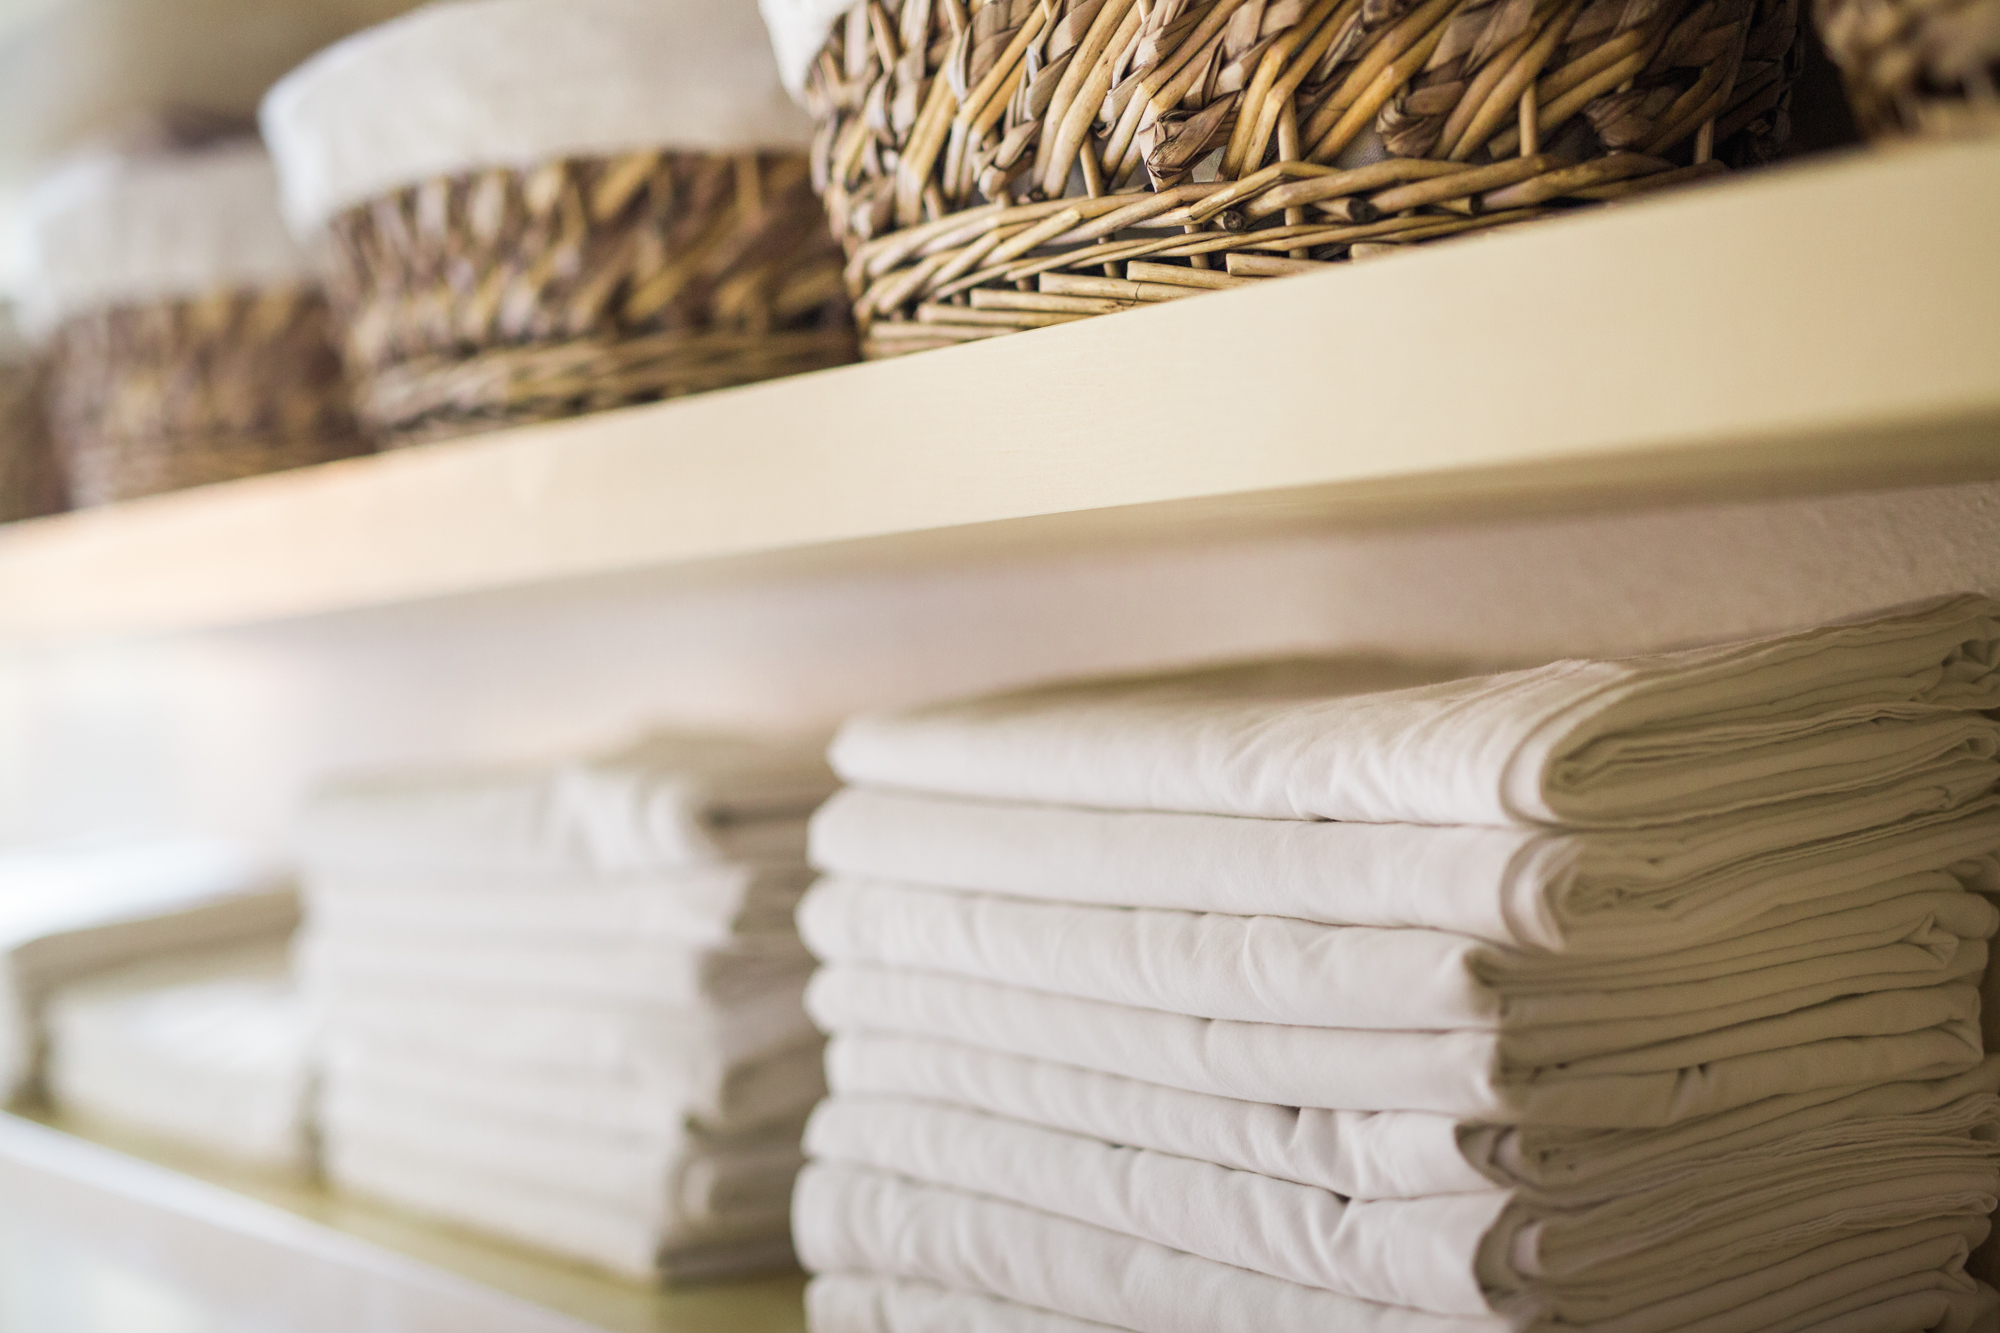  Images displays freshly laundered linens and towels, neatly stacked on shelves at Mantis Massage Austin Texas. Experience pristine comfort where every detail is meticulously cared for. Mantis Massage promises a hygienic and luxurious      massage ex